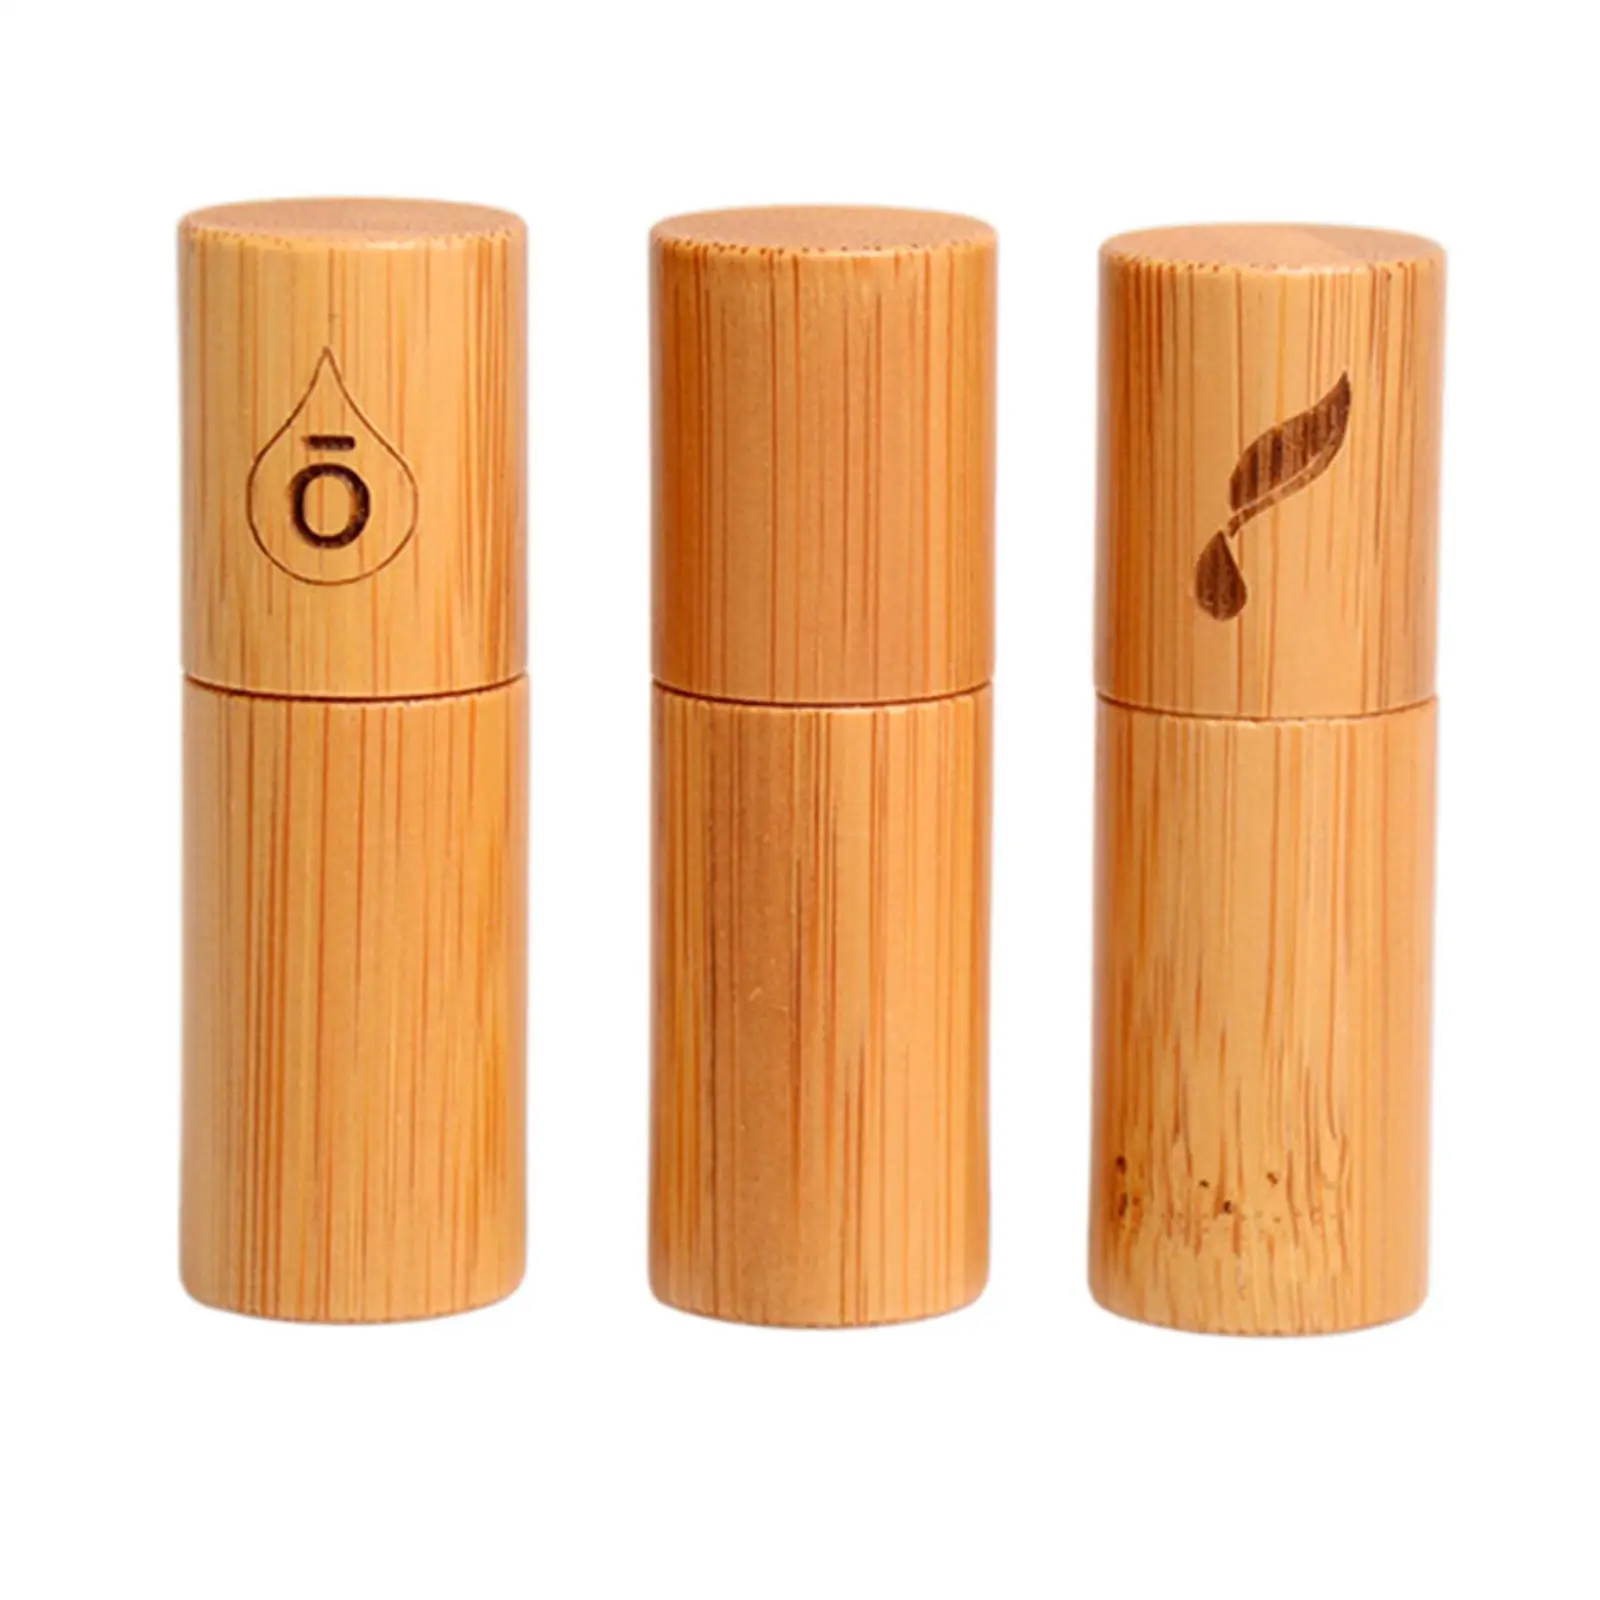 5ml Bamboo Essential Oil Roller Bottles Roll On for Lip Gloss Eye Cream Storage DIY Homemade Cosmetic Product Elegant Convenient